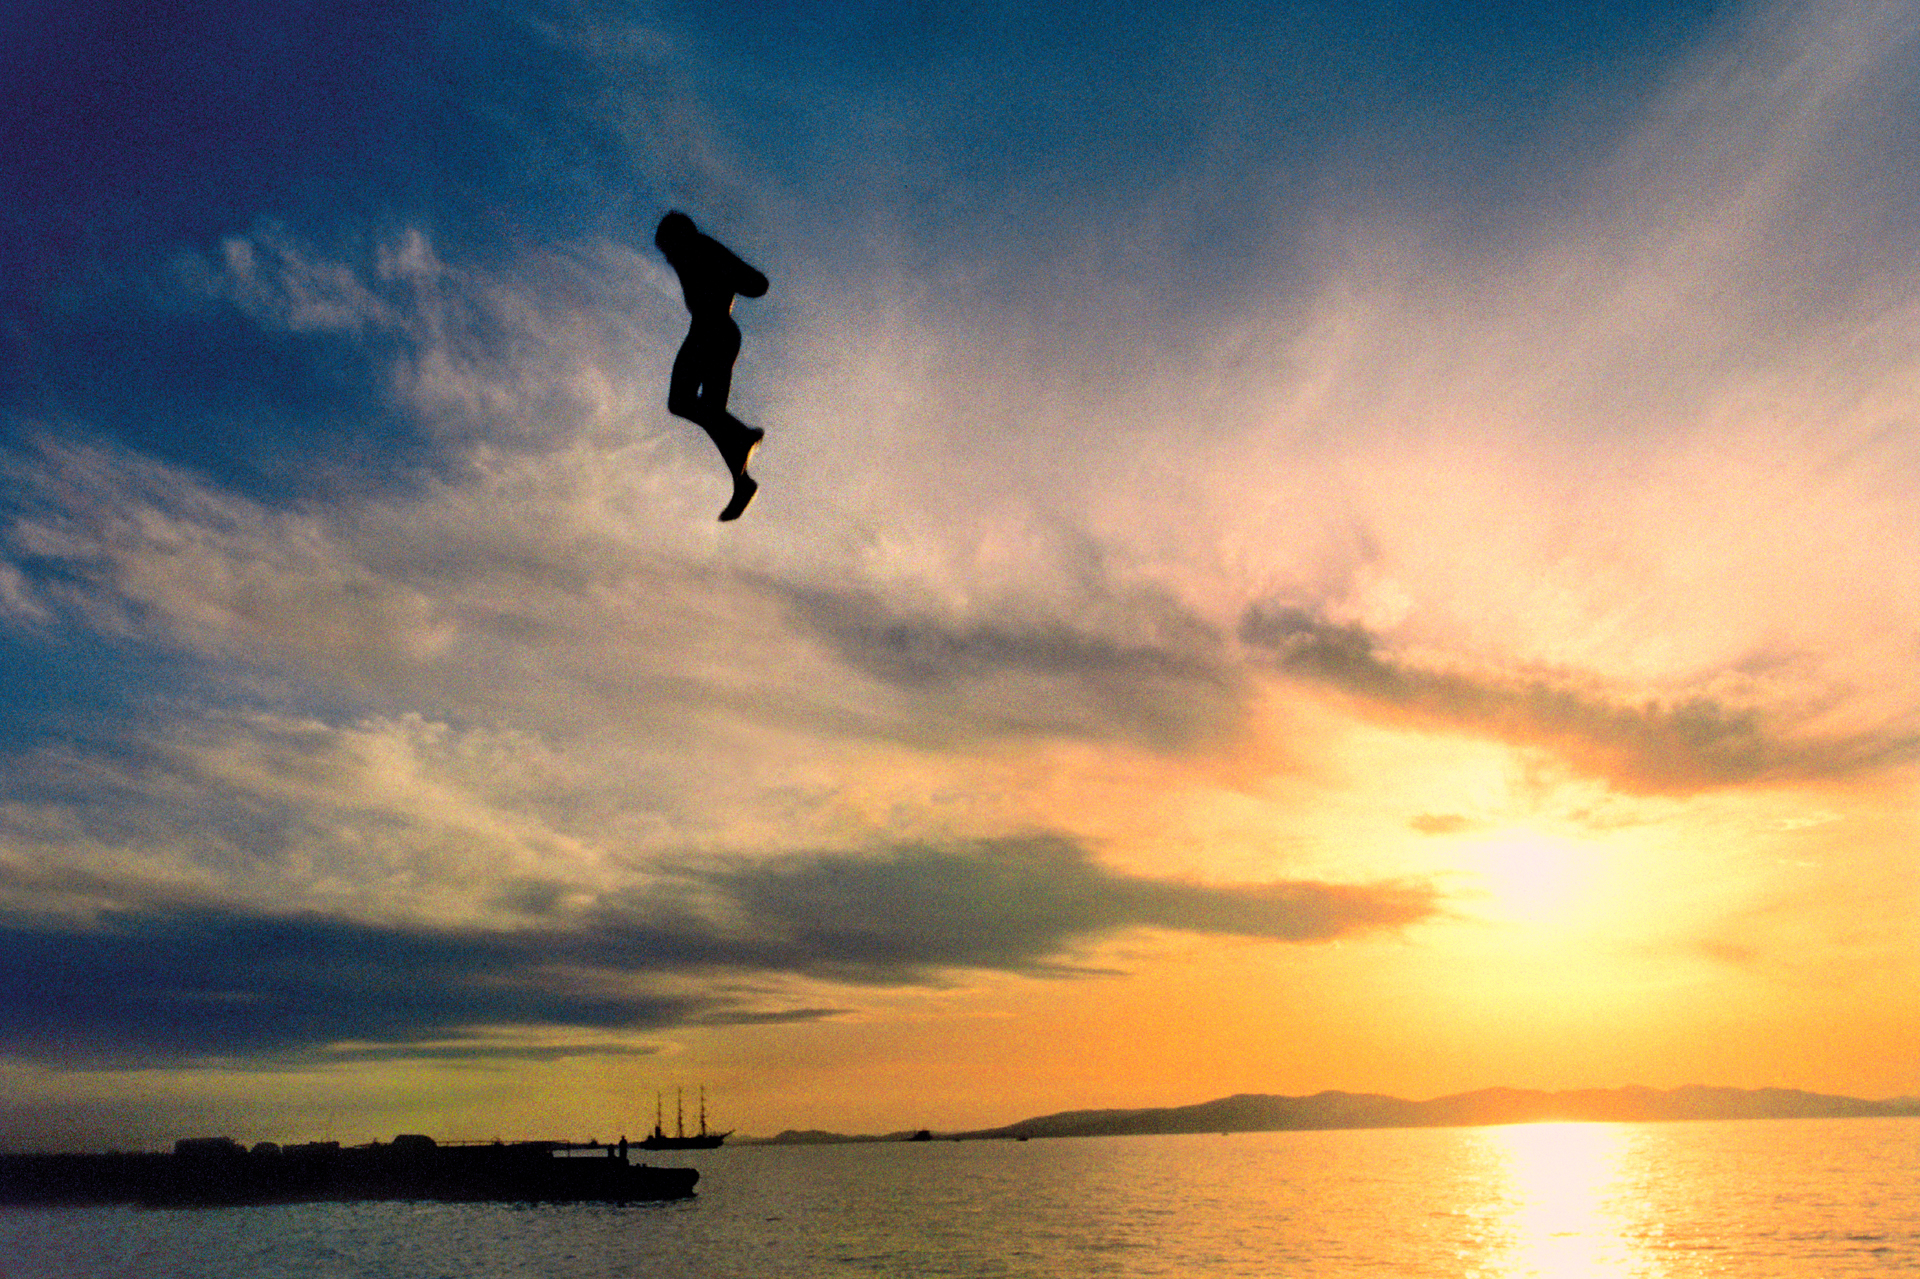  A swimmer jumps into the Sea of Japan in Vladivostok, a Russian traditional summer vacation spot.  Vladivostock, Russia  